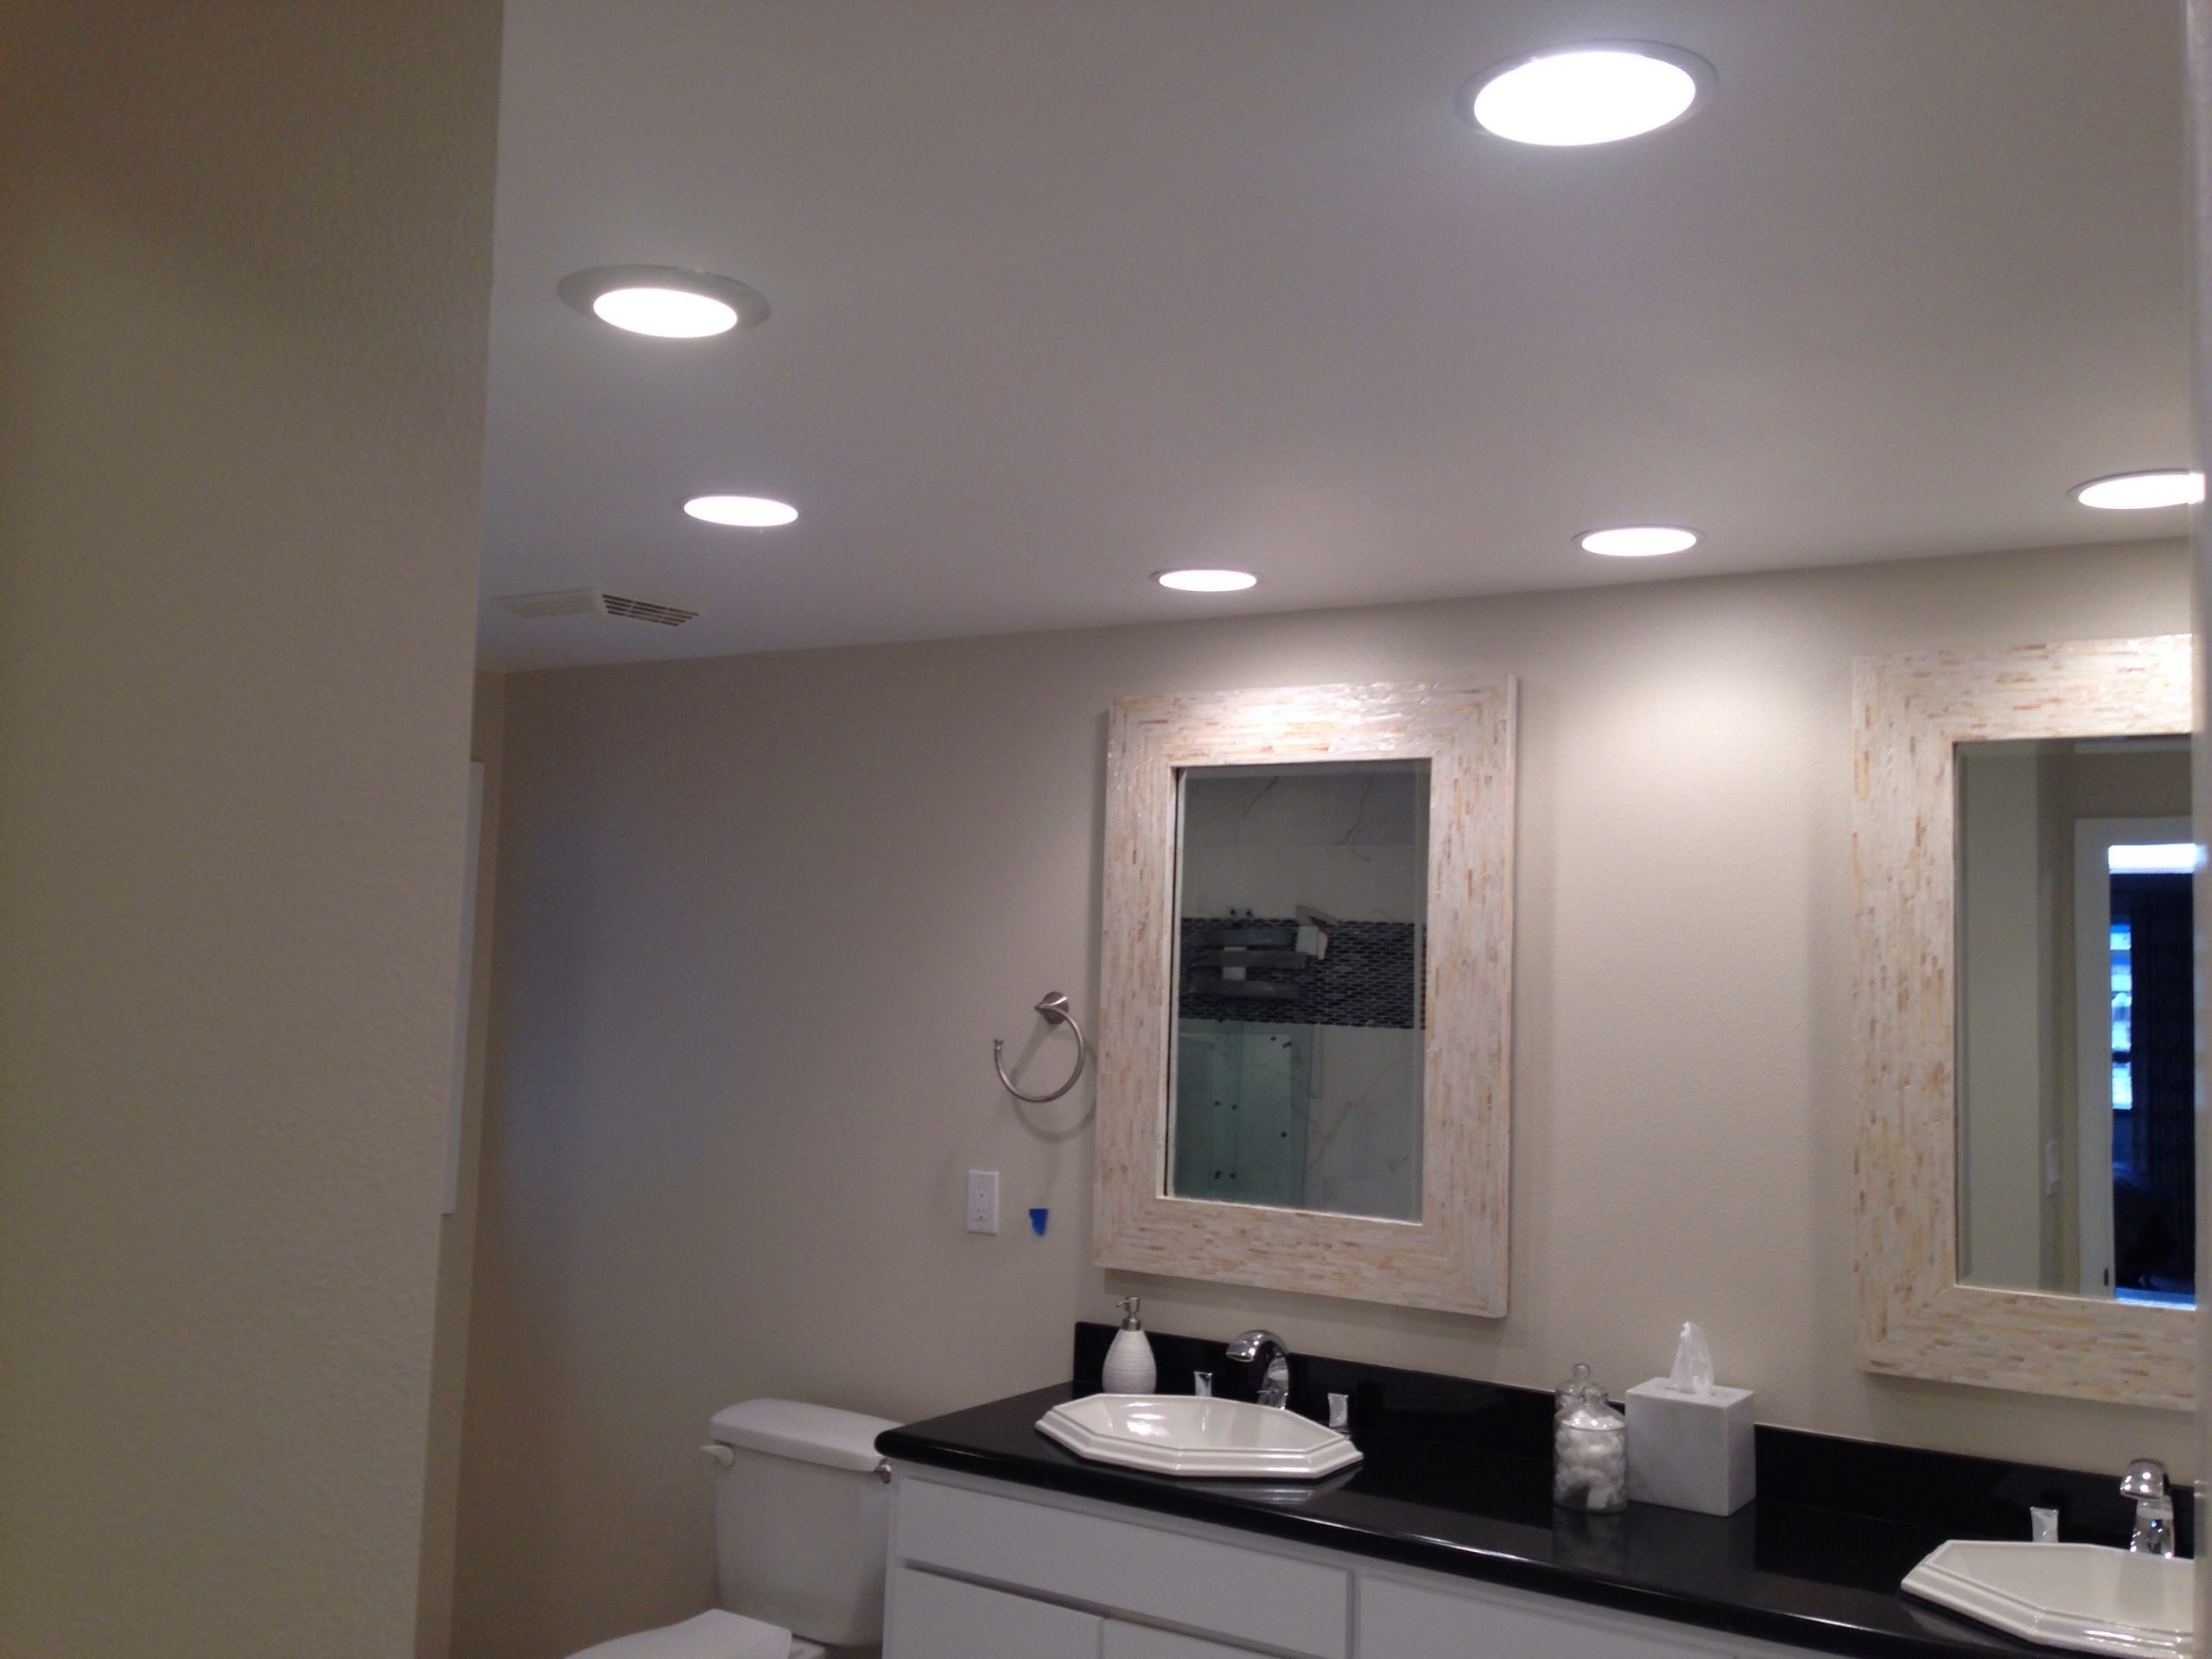 Incredible Bathroom Recessed Lighting Creative Images in size 3264 X 2448